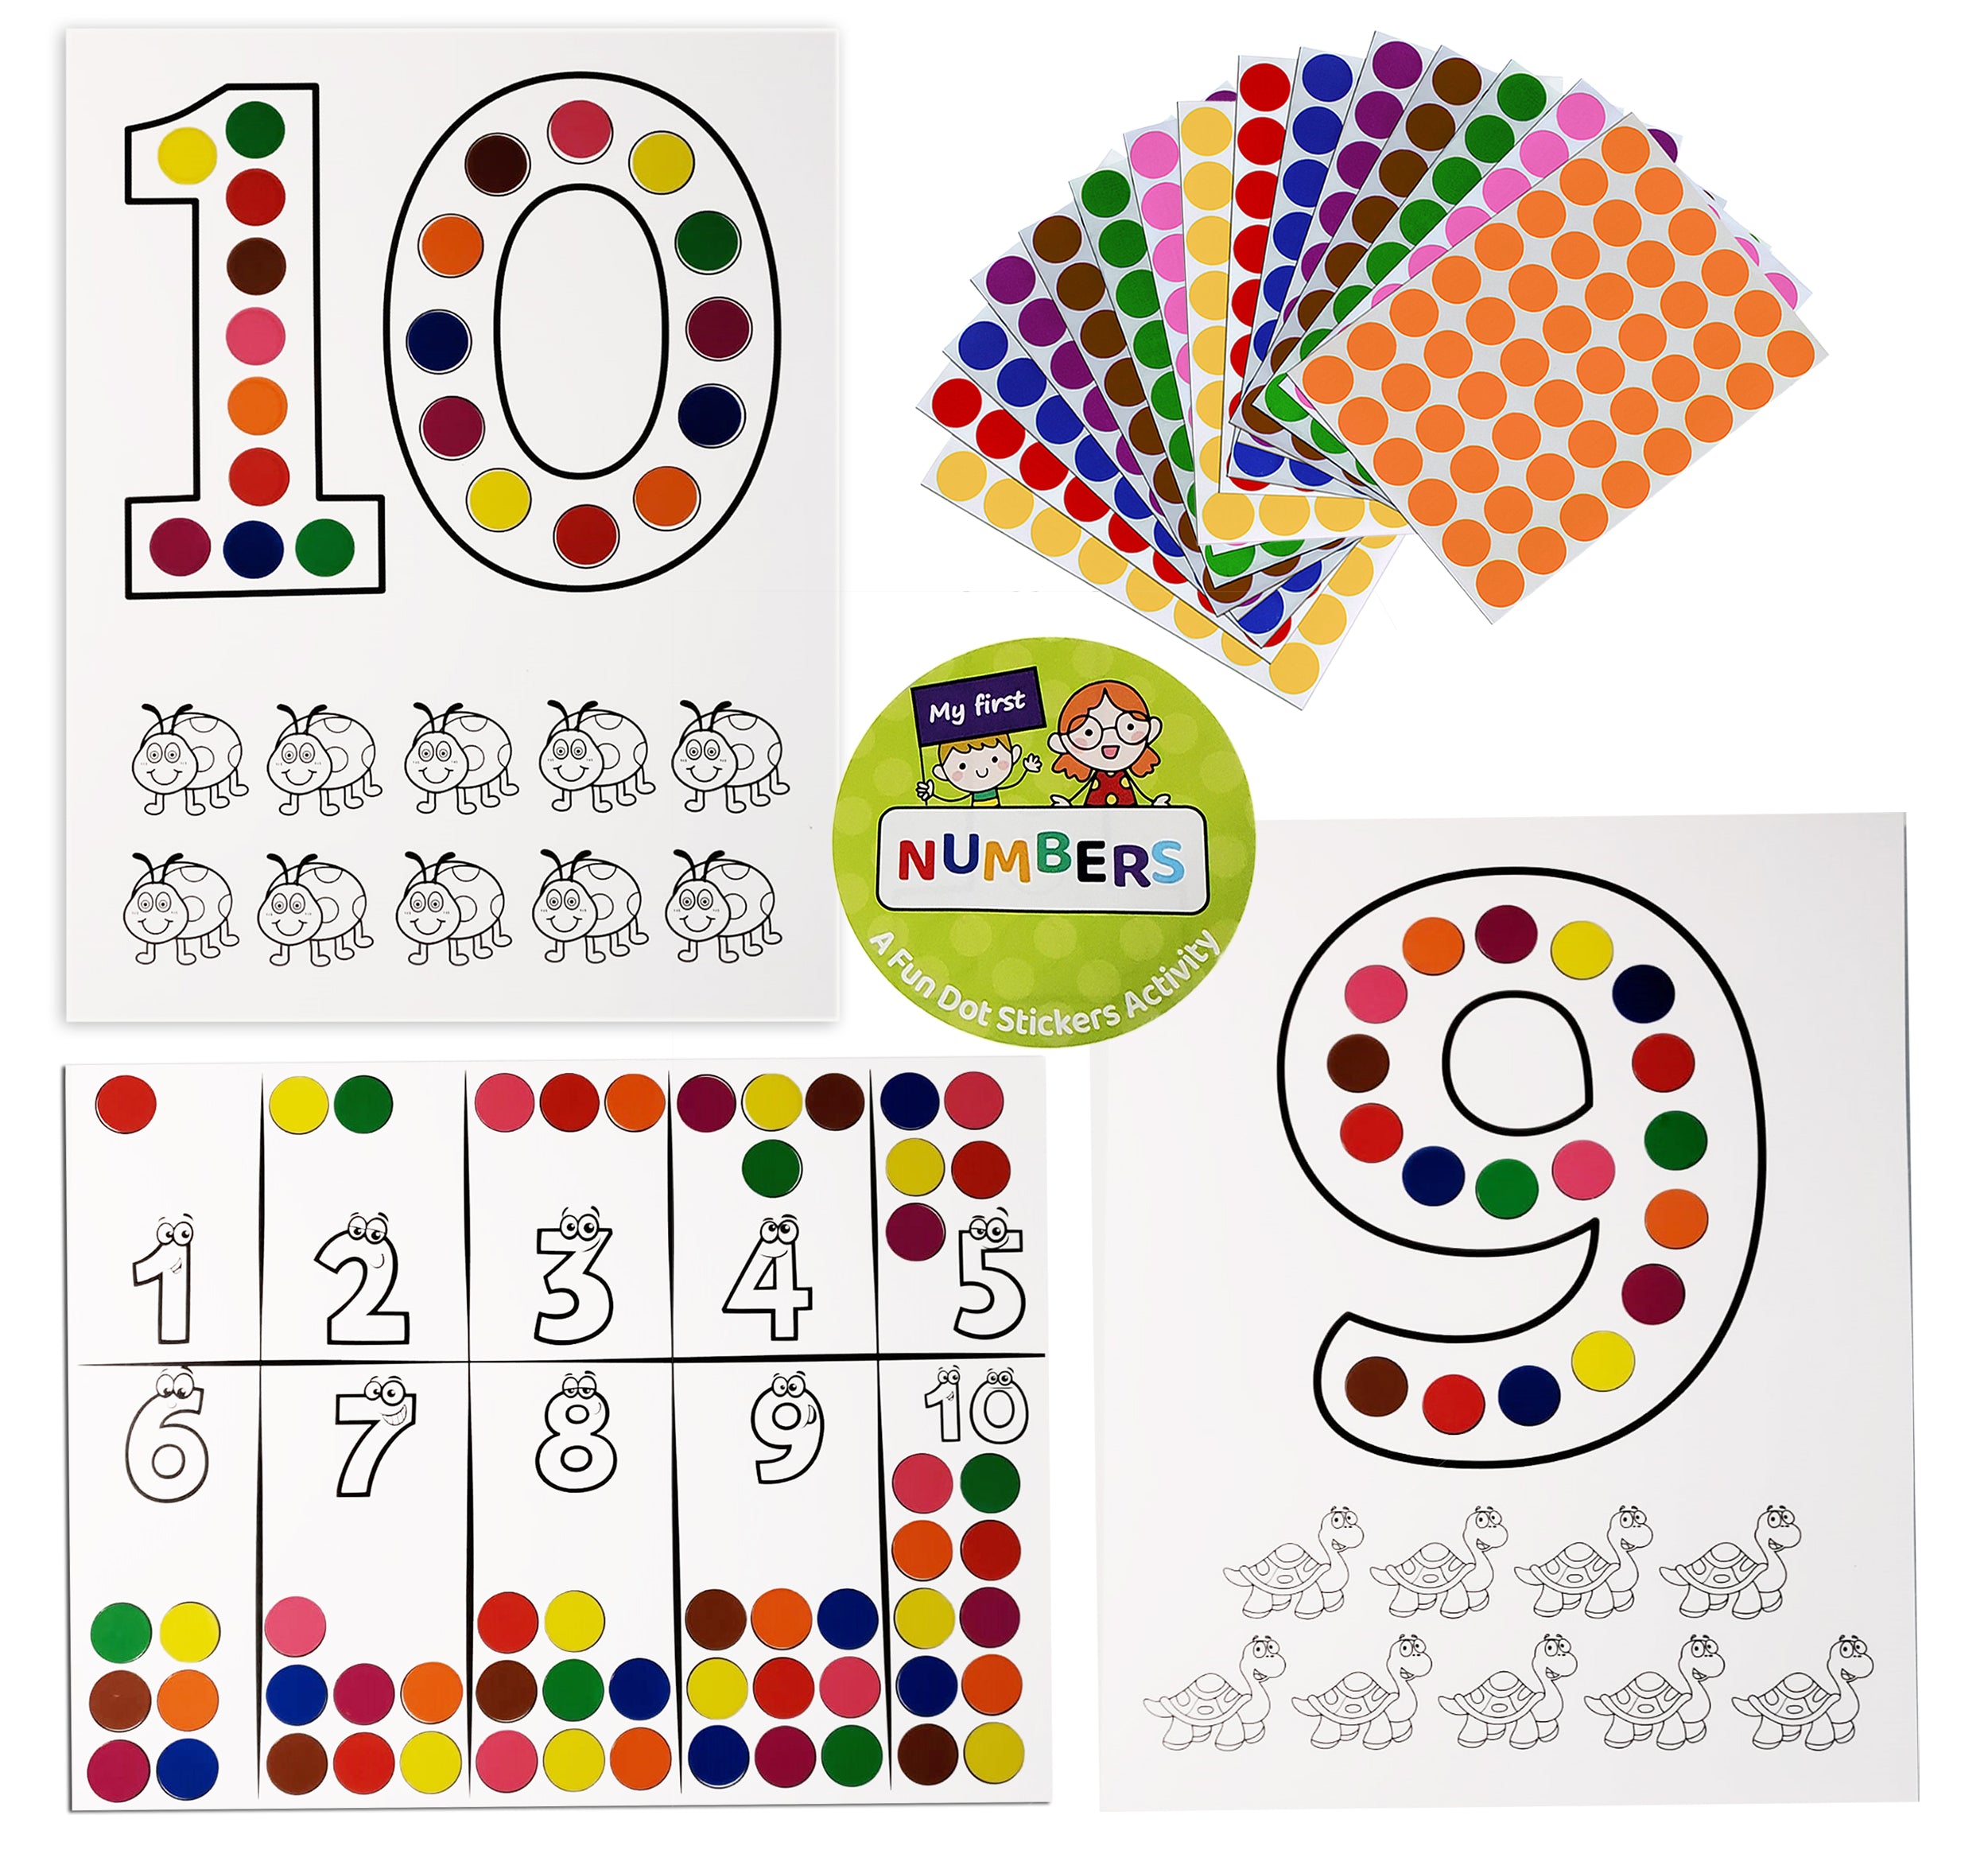 Royal Green Fun Dot Sticker Activity Sheets for Kids, My First Numbers (1-10), Creative Learning for Ages